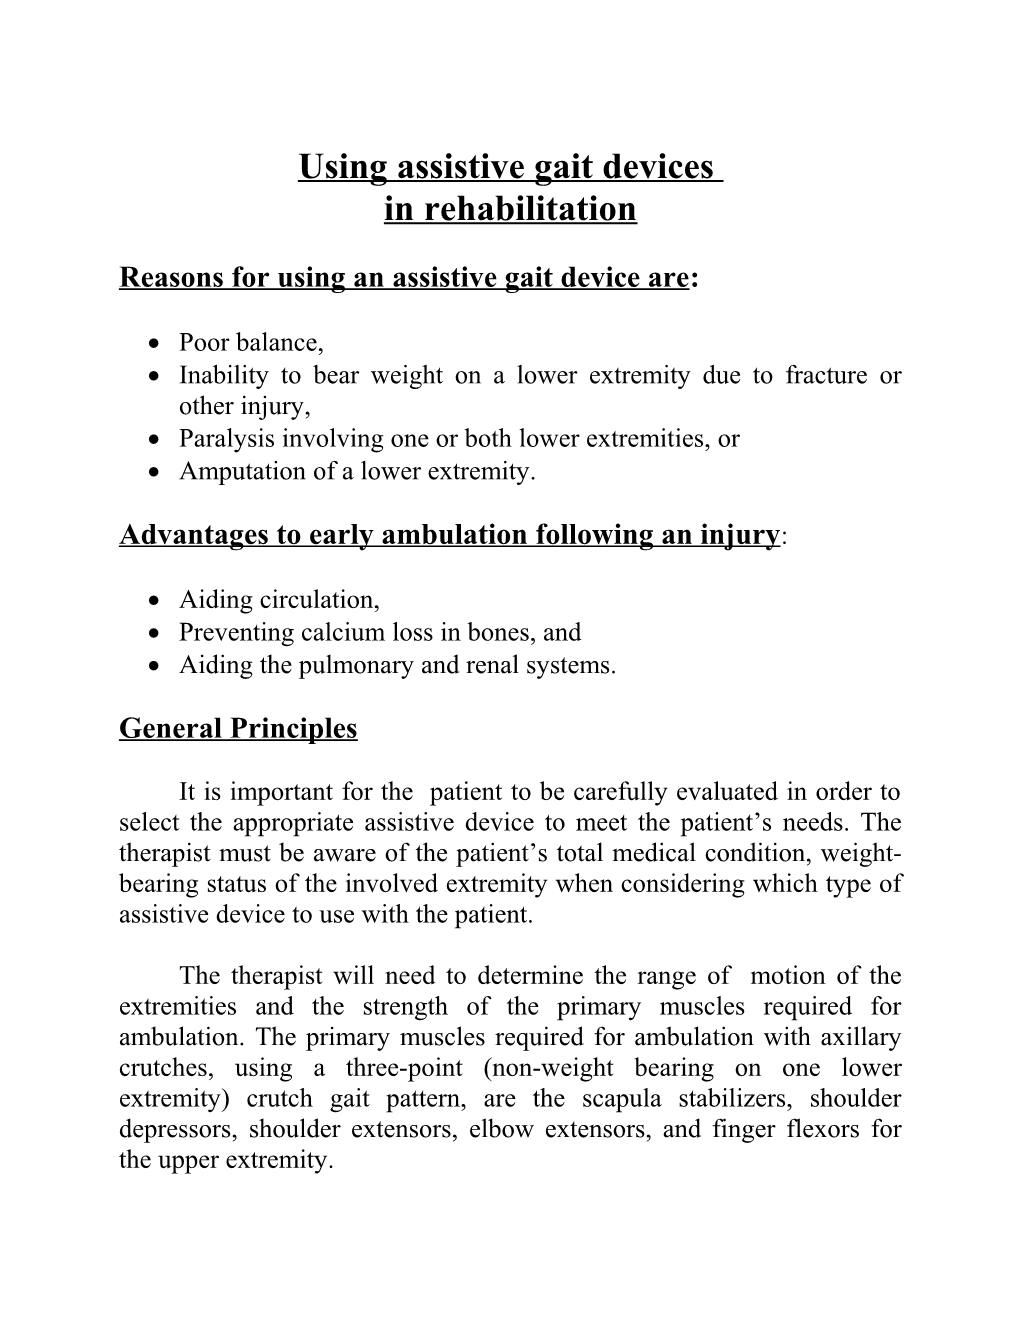 Using Assistive Gait Devices